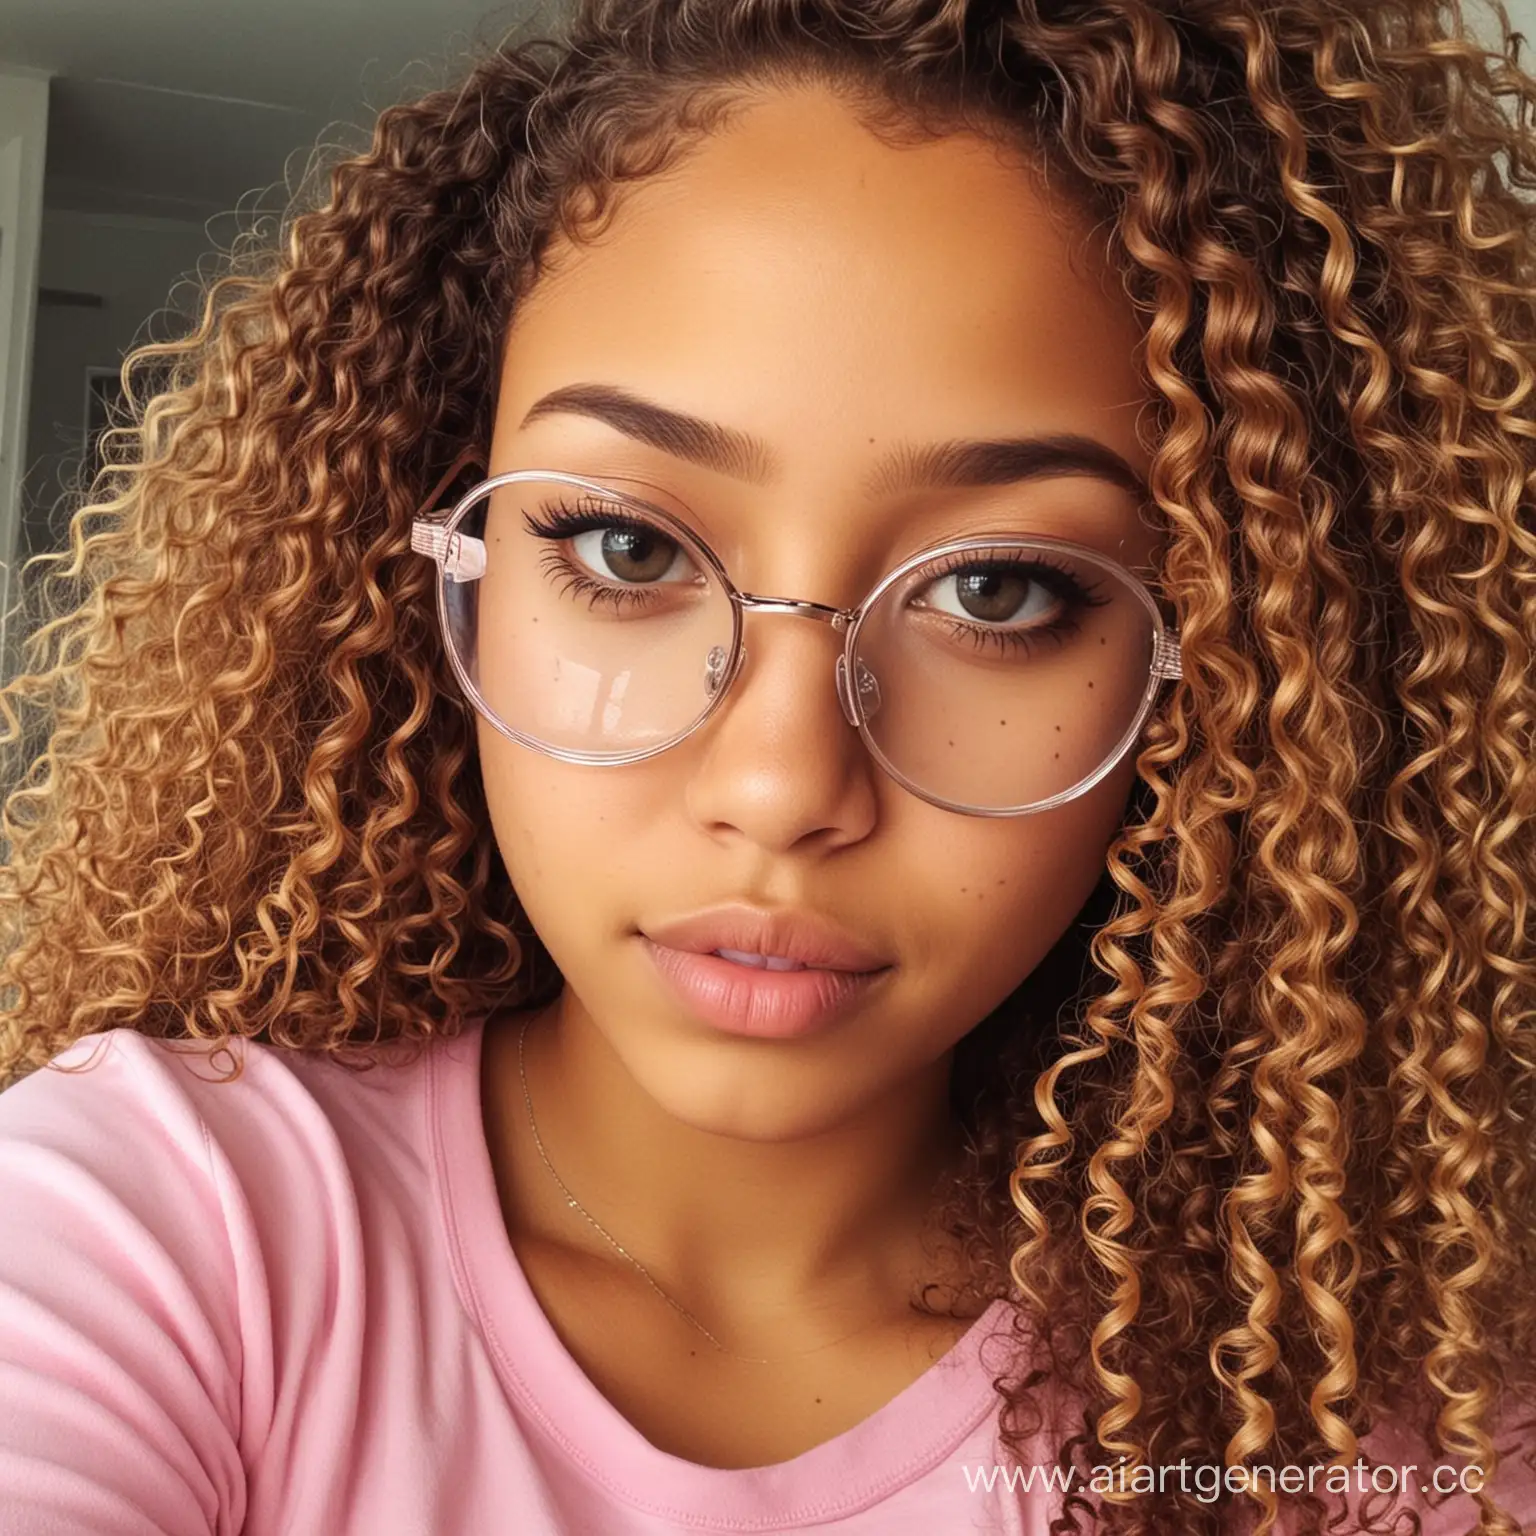 Portrait-of-a-Stylish-CurlyHaired-Mulatto-Teenager-with-Glasses